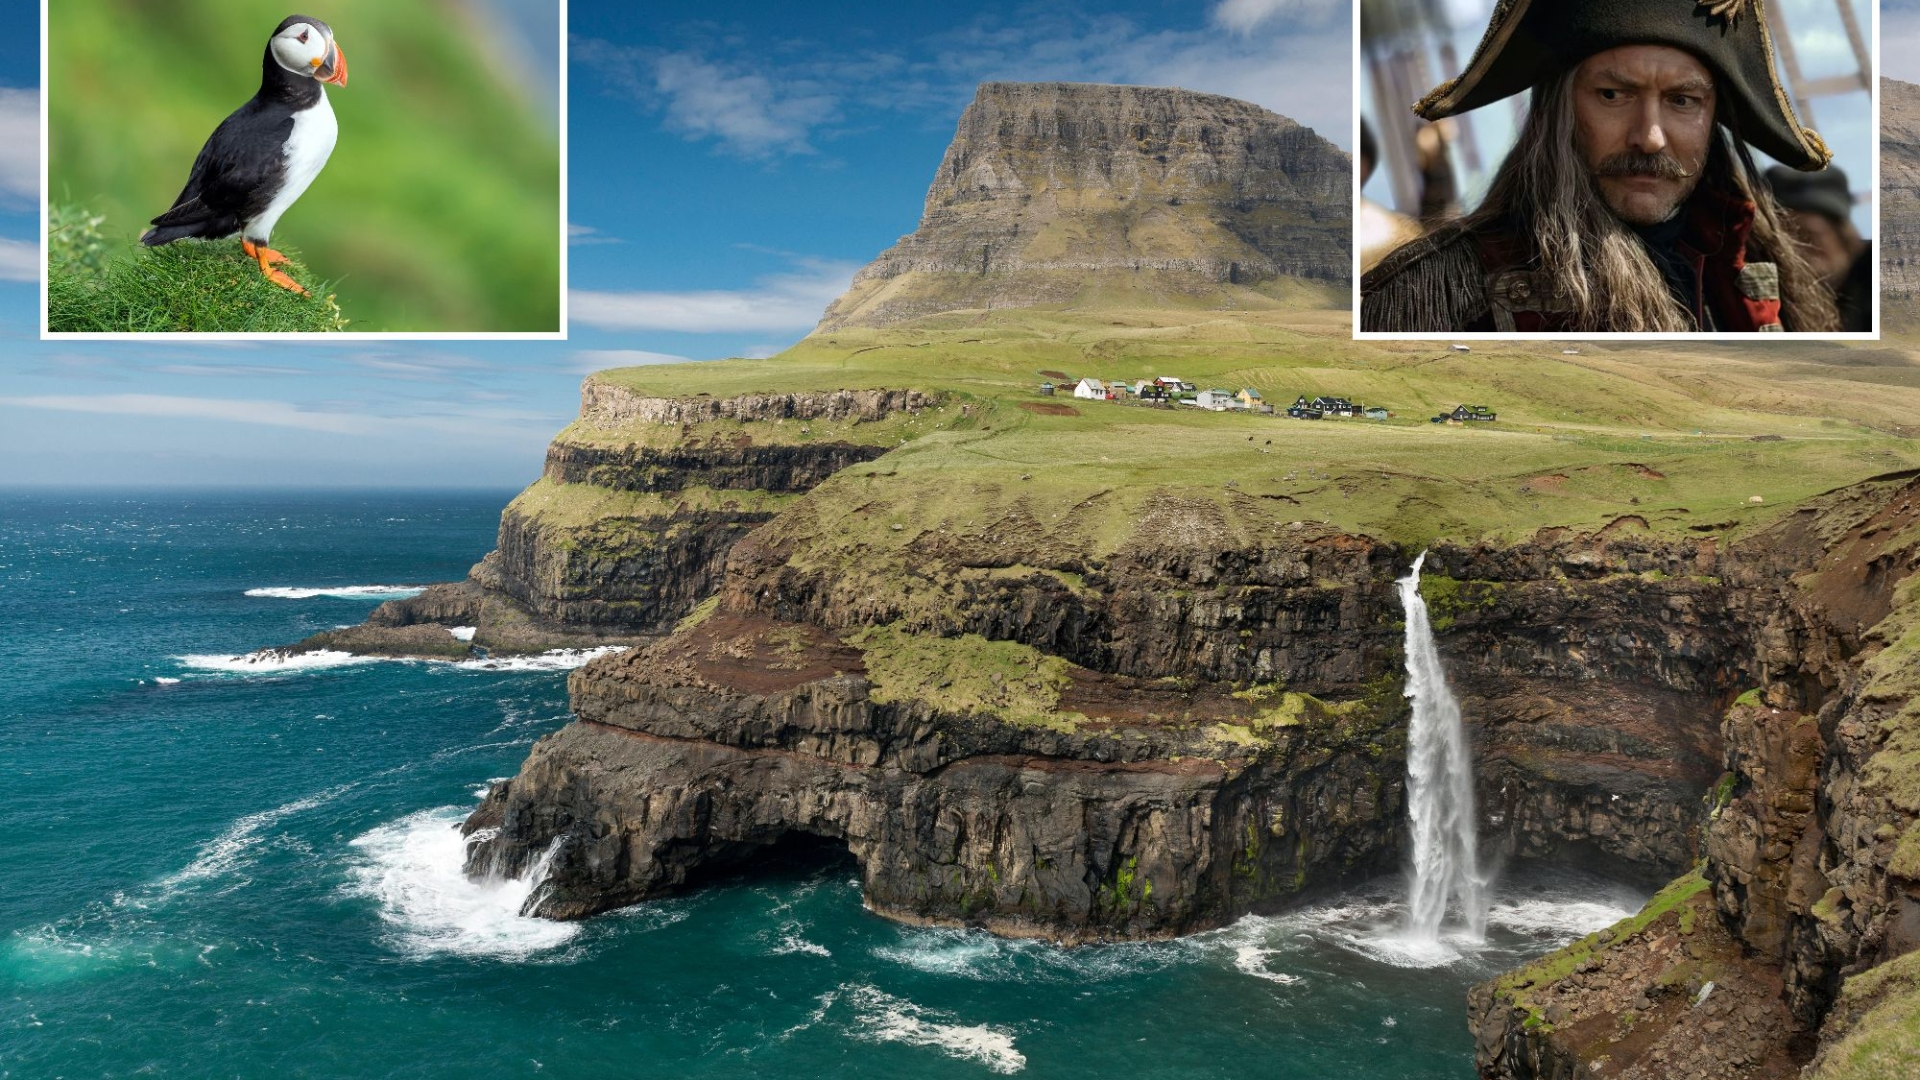 Only an hour’s drive from the UK, this incredible island is where the new Peter Pan Hollywood film was filmed.